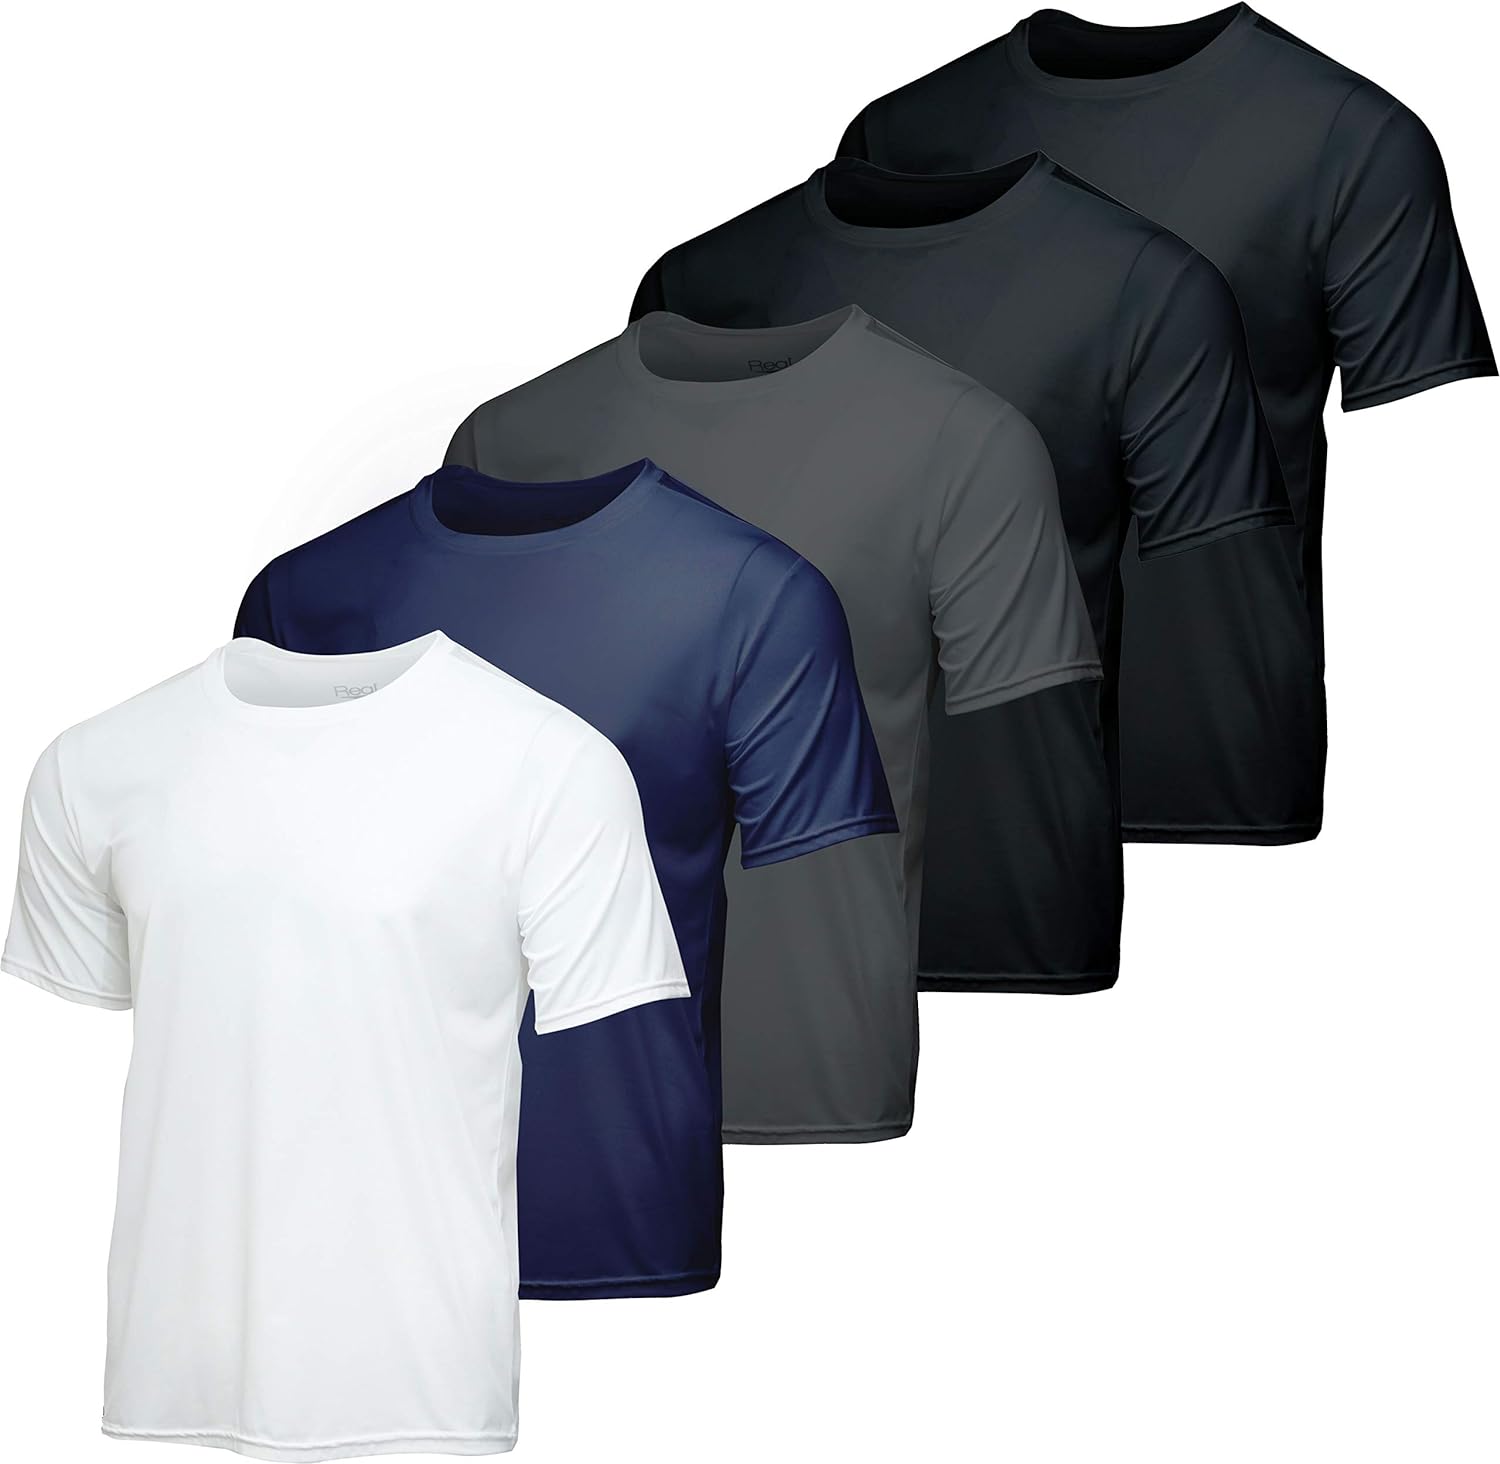 Moisture Wicking Opna Youth Athletic Performance Long Sleeve Shirts for Boy's or Girl's